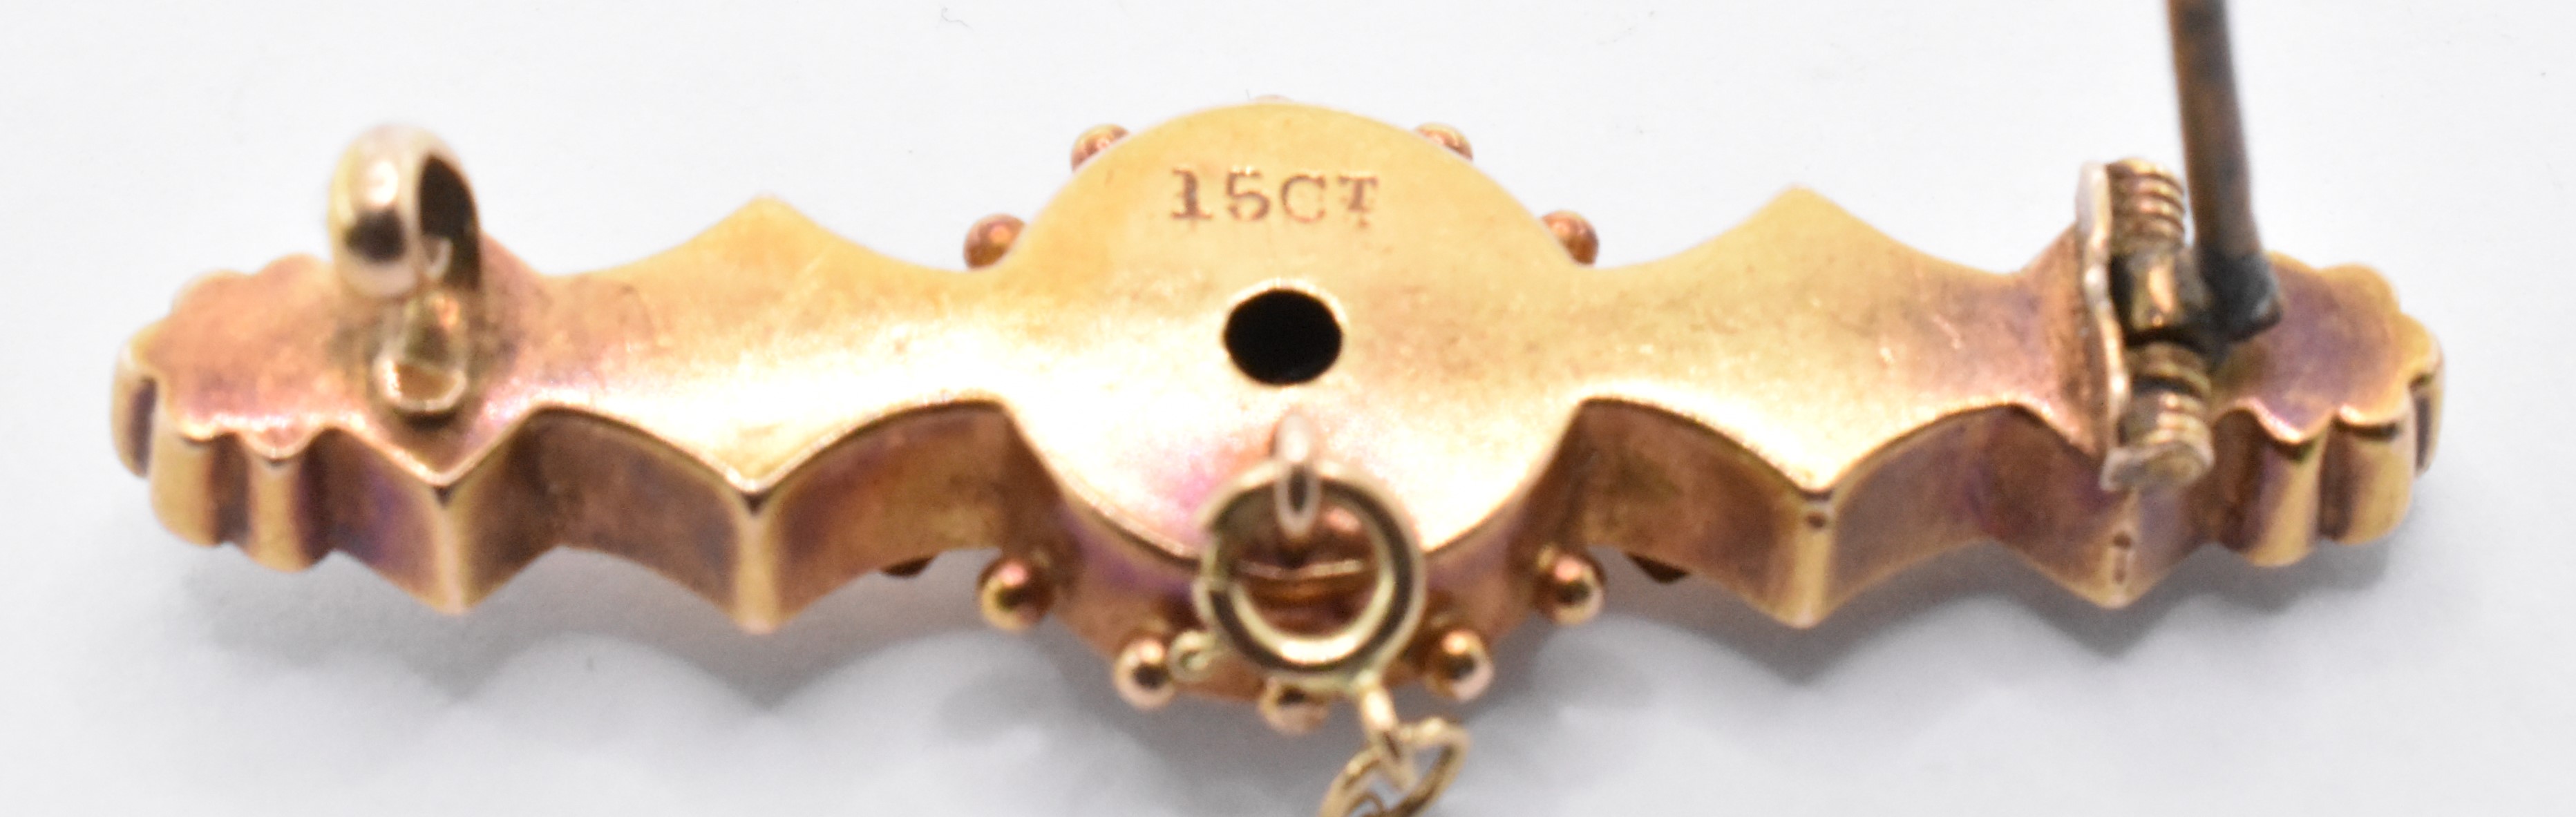 19TH CENTURY 15CT GOLD AND DIAMOND BROOCH - Image 3 of 3